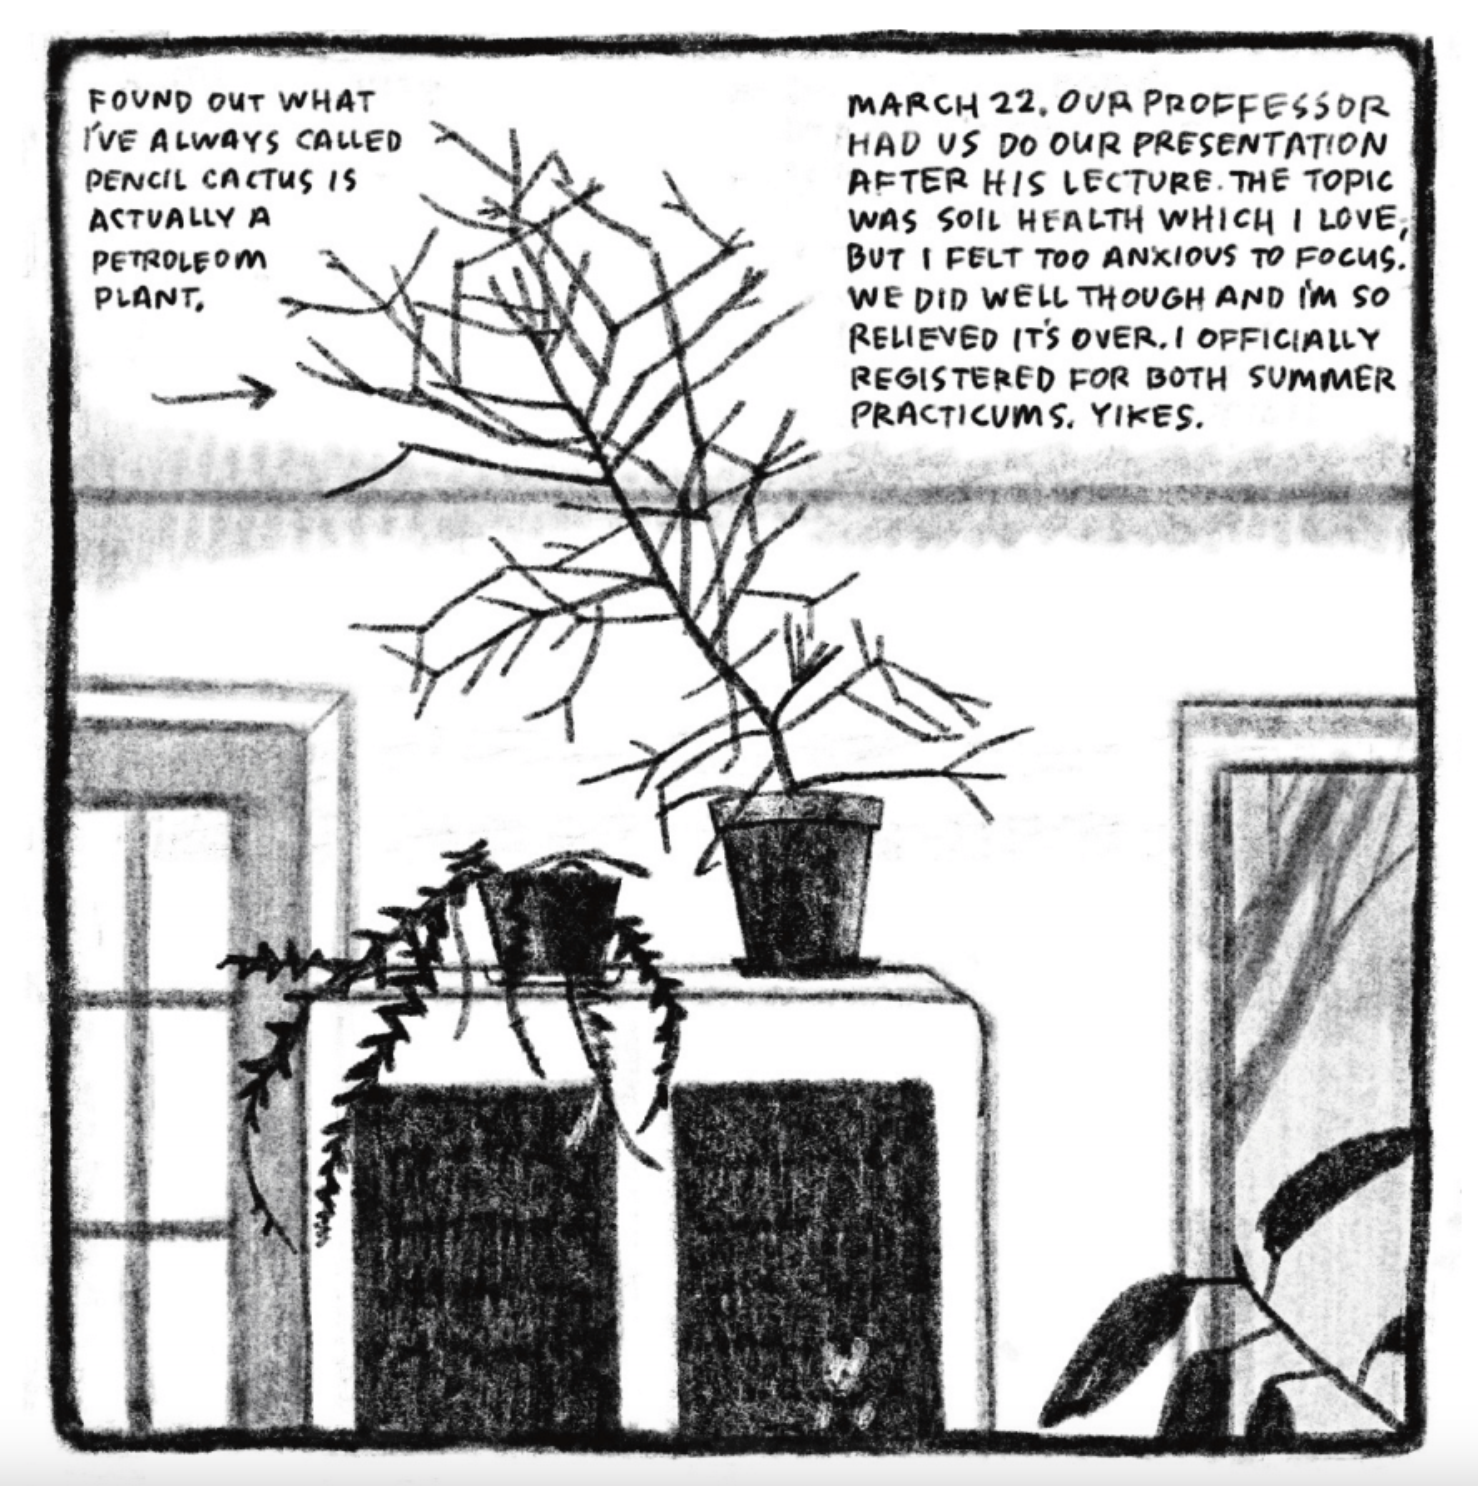 A scene from inside a house: two potted plants sit atop a cabinet. One is a petroleum plant, identified explicitly with an arrow. A French door window is seen to the left, a large picture frame to the right.

Description reads, with an arrow: "Found out what I've always called pencil cactus is actually a petroleum plant.

March 22. Our professor had us do our presentation after his lecture. The topic was soil health which I love, but I felt too anxious to focus. We did well through and I'm so relieved it's over. I officially registered for both summer practicums. Yikes." 